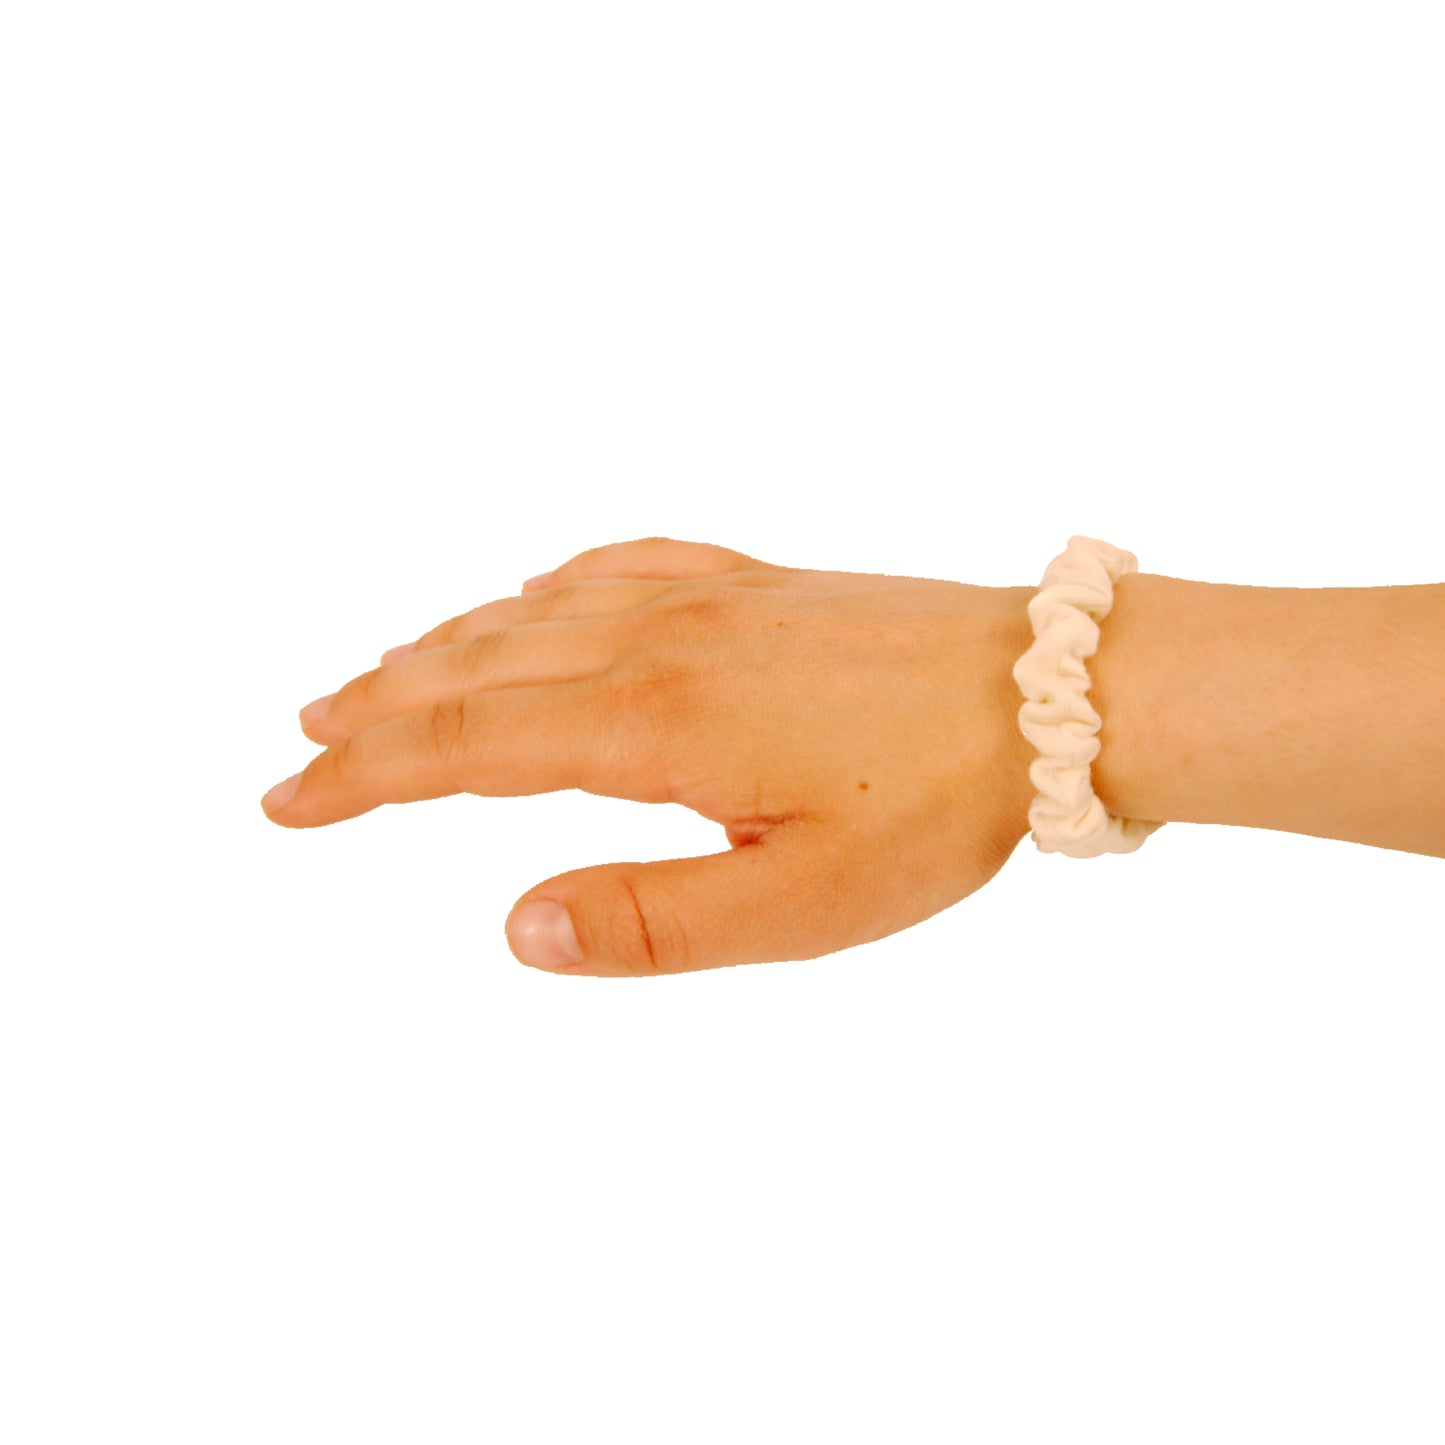 Amelia Beauty, White Jersey Scrunchies, 2.25in Diameter, Gentle on Hair, Strong Hold, No Snag, No Dents or Creases. 12 Pack